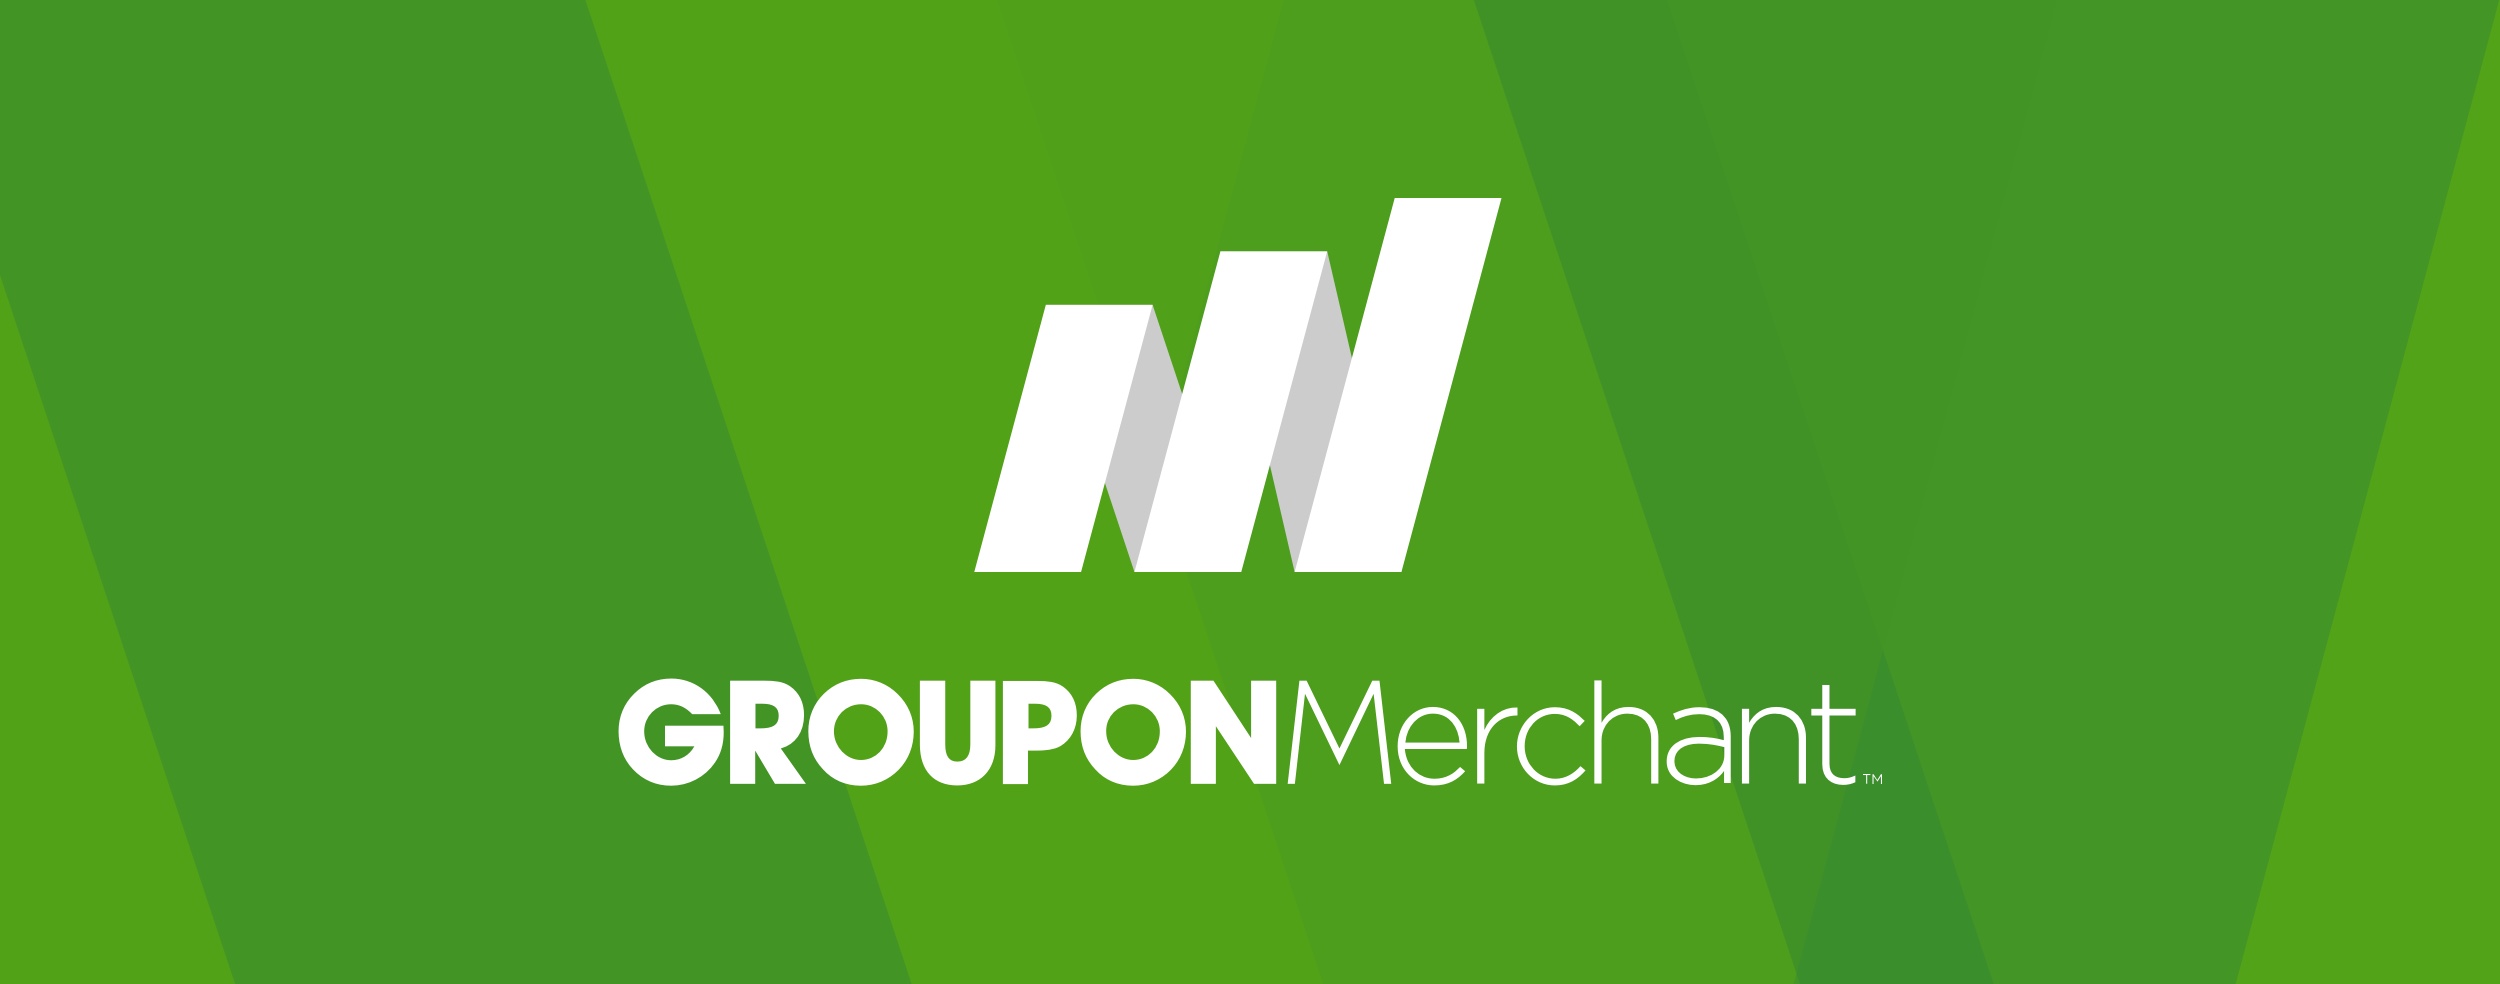 How To Get Customer Feedback In Your Groupon Merchant Center - Groupon  Merchant